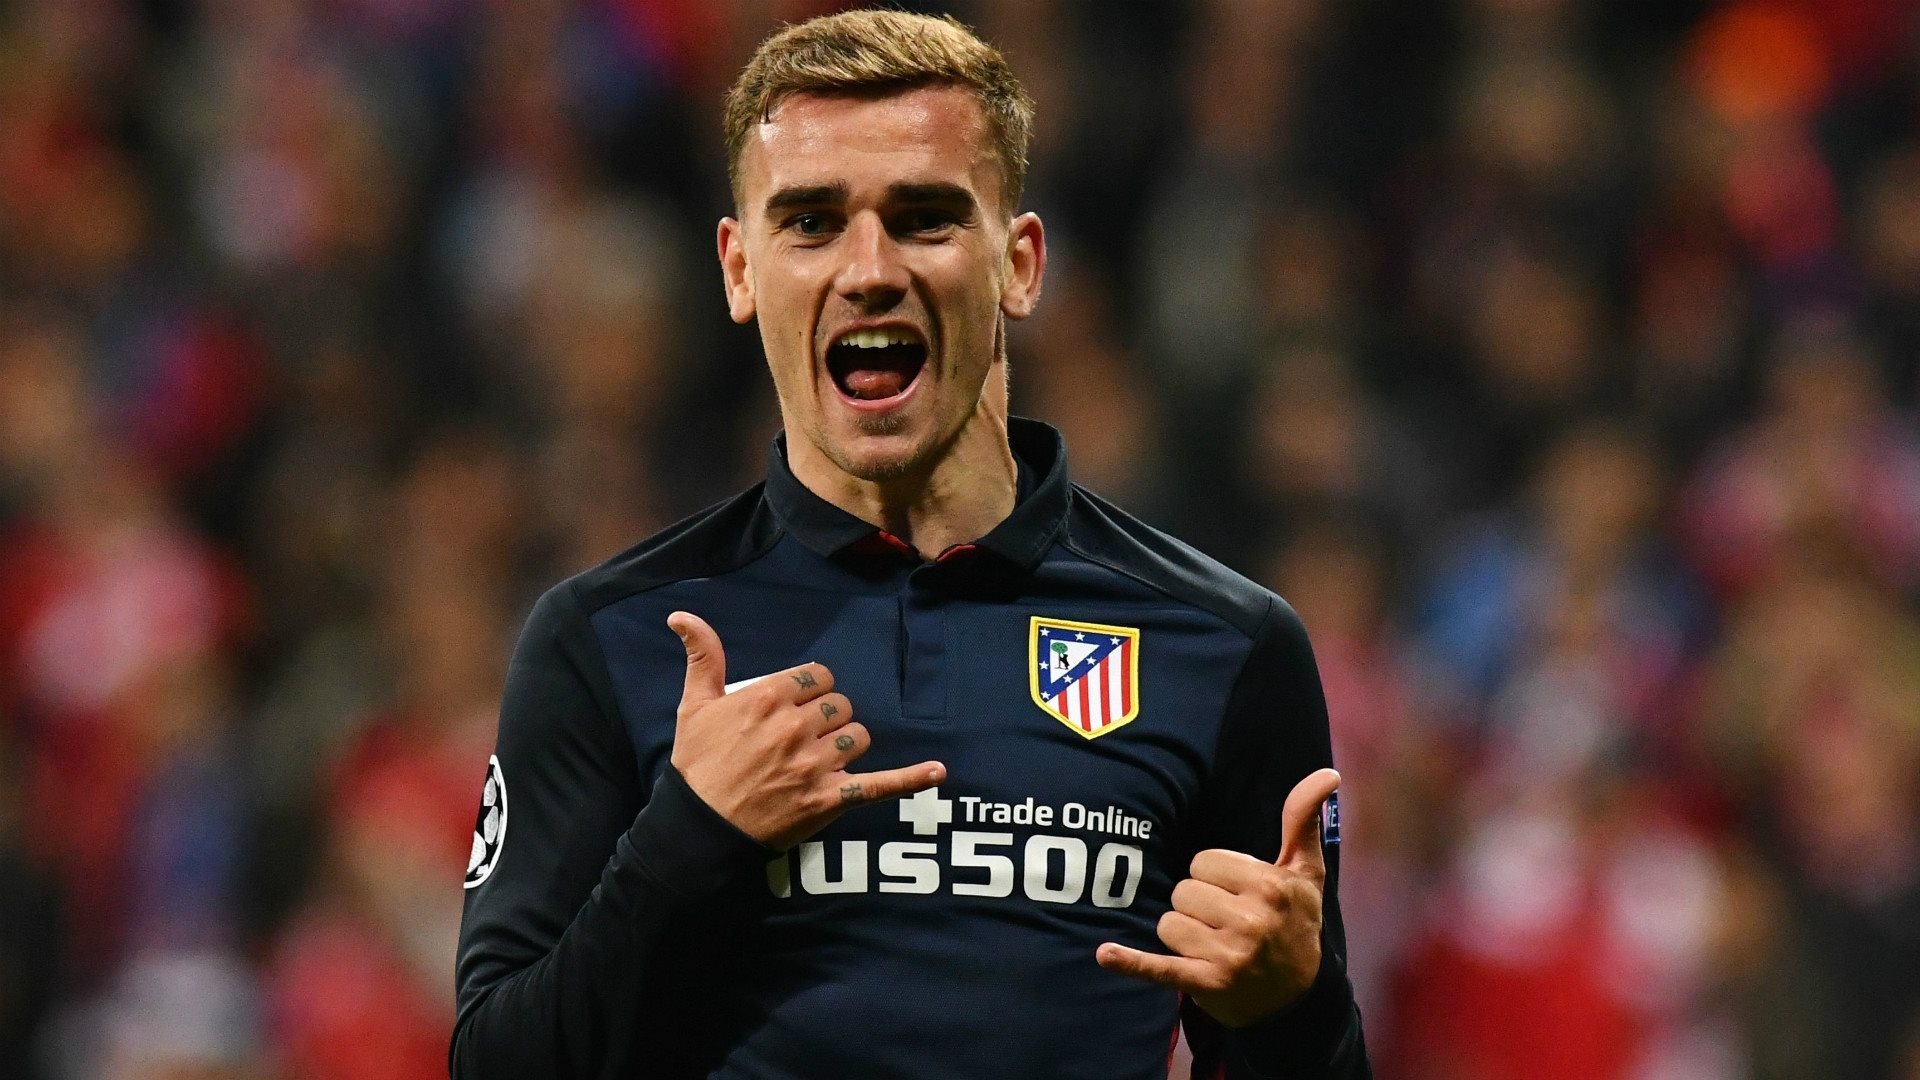 Atletico Madrid: Antoine Griezmann, The club moved to the Vicente Calderon Stadium in 1966. 1920x1080 Full HD Wallpaper.